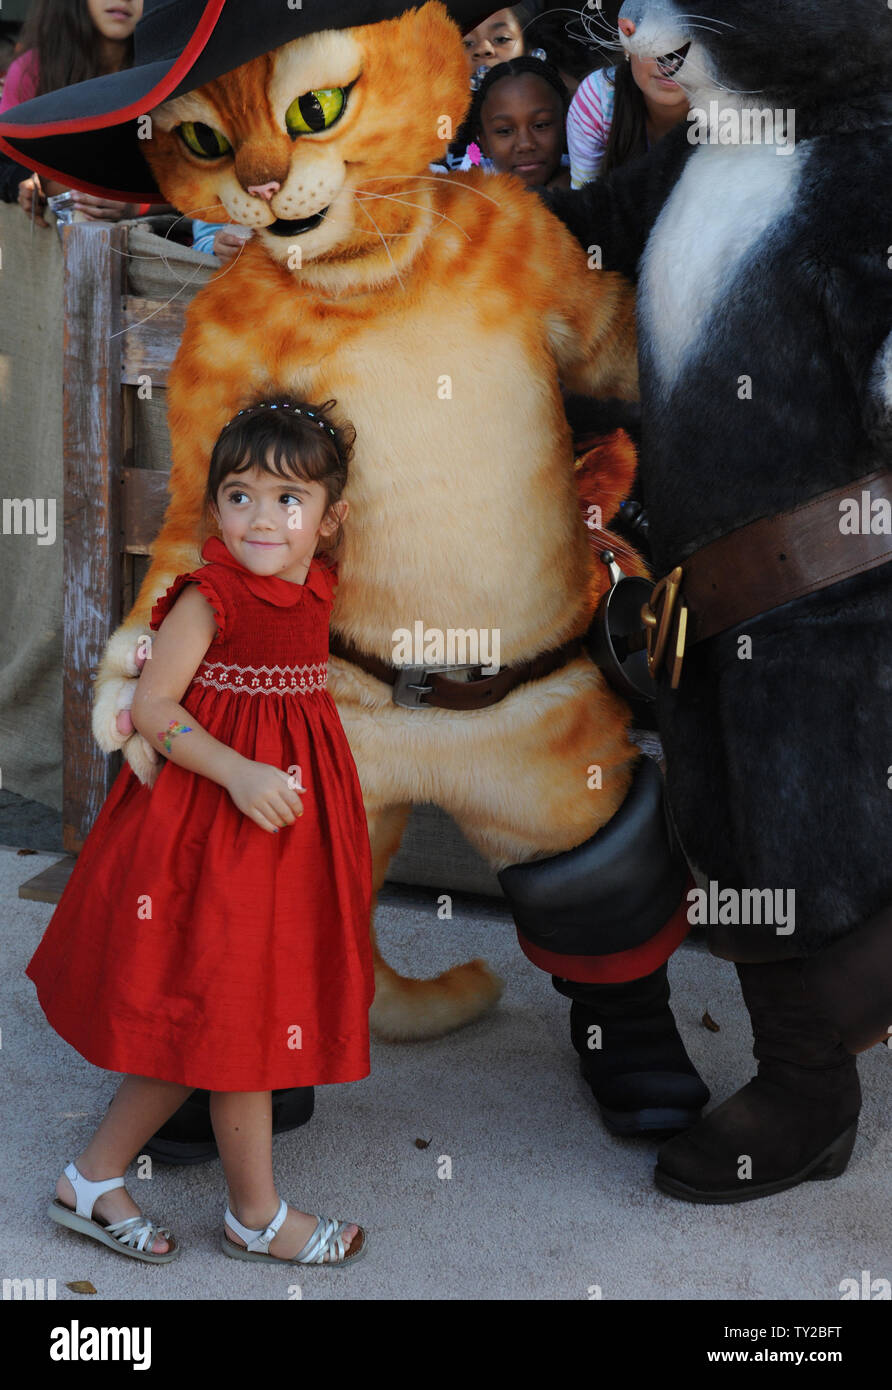 Valentina Paloma Pinault, the daughter of Salma Hayek, the voice of Kitty Southpaw in the motion picture animated comedy 'Puss In Boots', attends the premiere of the film at the Regency Village Theatre in the Westwood section of Los Angeles on October 23, 2011.   UPI/Jim Ruymen Stock Photo